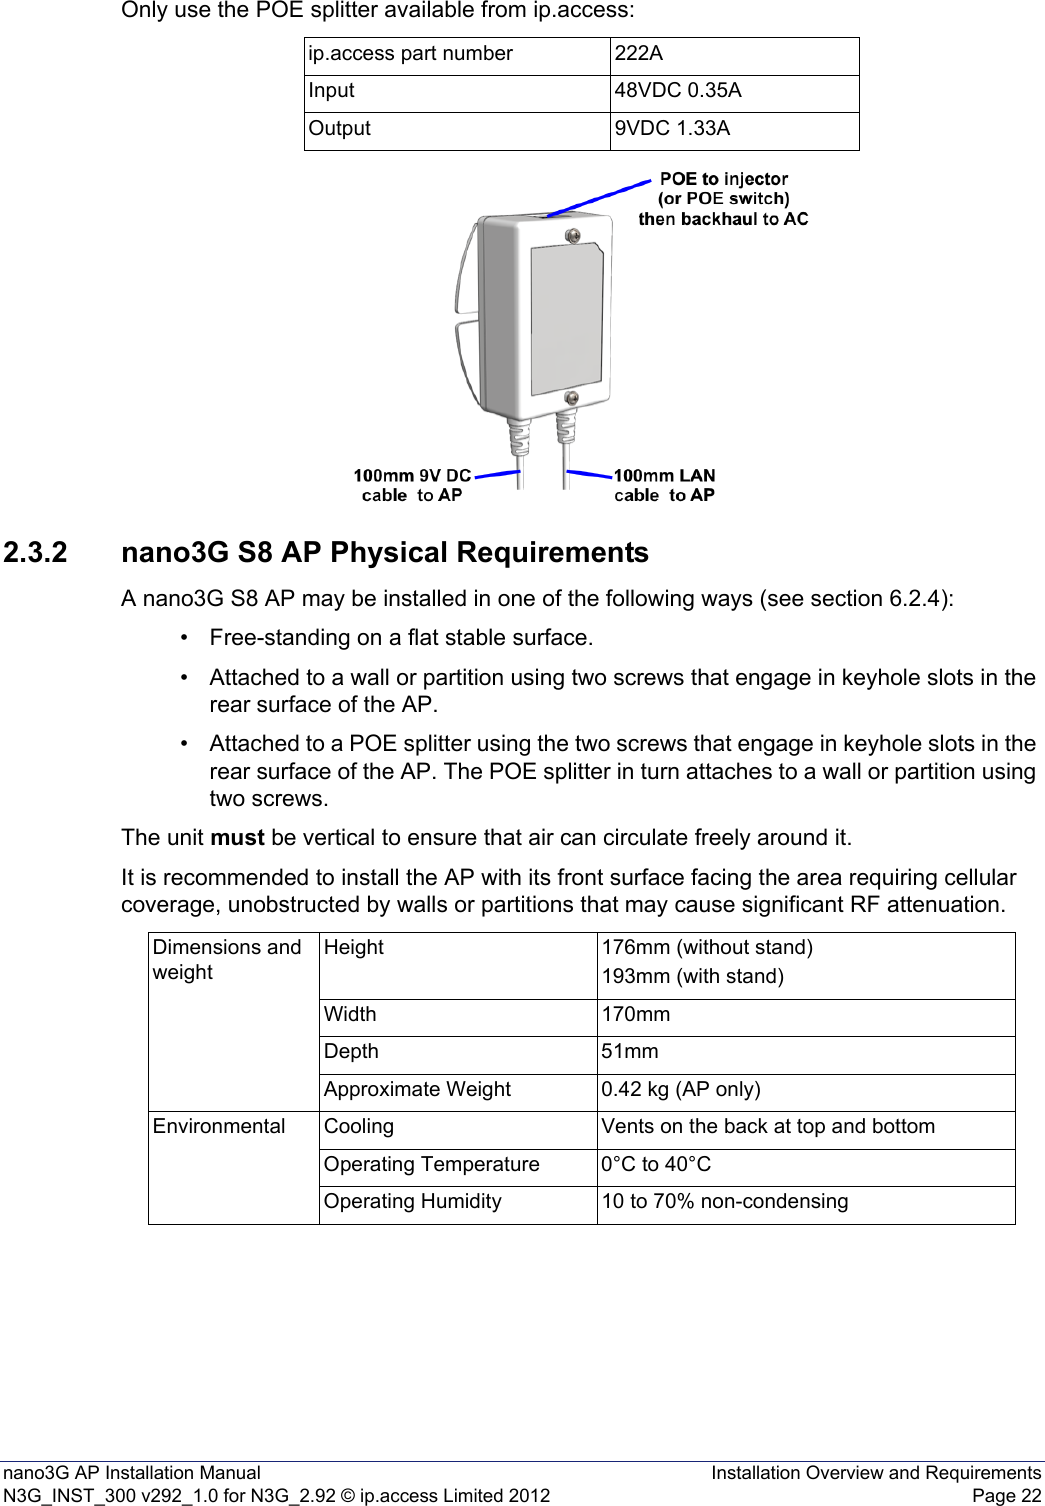 nano3G AP Installation Manual Installation Overview and RequirementsN3G_INST_300 v292_1.0 for N3G_2.92 © ip.access Limited 2012 Page 22Only use the POE splitter available from ip.access:2.3.2 nano3G S8 AP Physical RequirementsA nano3G S8 AP may be installed in one of the following ways (see section 6.2.4):• Free-standing on a flat stable surface.• Attached to a wall or partition using two screws that engage in keyhole slots in the rear surface of the AP.• Attached to a POE splitter using the two screws that engage in keyhole slots in the rear surface of the AP. The POE splitter in turn attaches to a wall or partition using two screws.The unit must be vertical to ensure that air can circulate freely around it.It is recommended to install the AP with its front surface facing the area requiring cellular coverage, unobstructed by walls or partitions that may cause significant RF attenuation.ip.access part number 222AInput 48VDC 0.35AOutput 9VDC 1.33ADimensions and weightHeight 176mm (without stand)193mm (with stand)Width 170mmDepth 51mmApproximate Weight 0.42 kg (AP only)Environmental Cooling Vents on the back at top and bottomOperating Temperature 0°C to 40°COperating Humidity 10 to 70% non-condensing